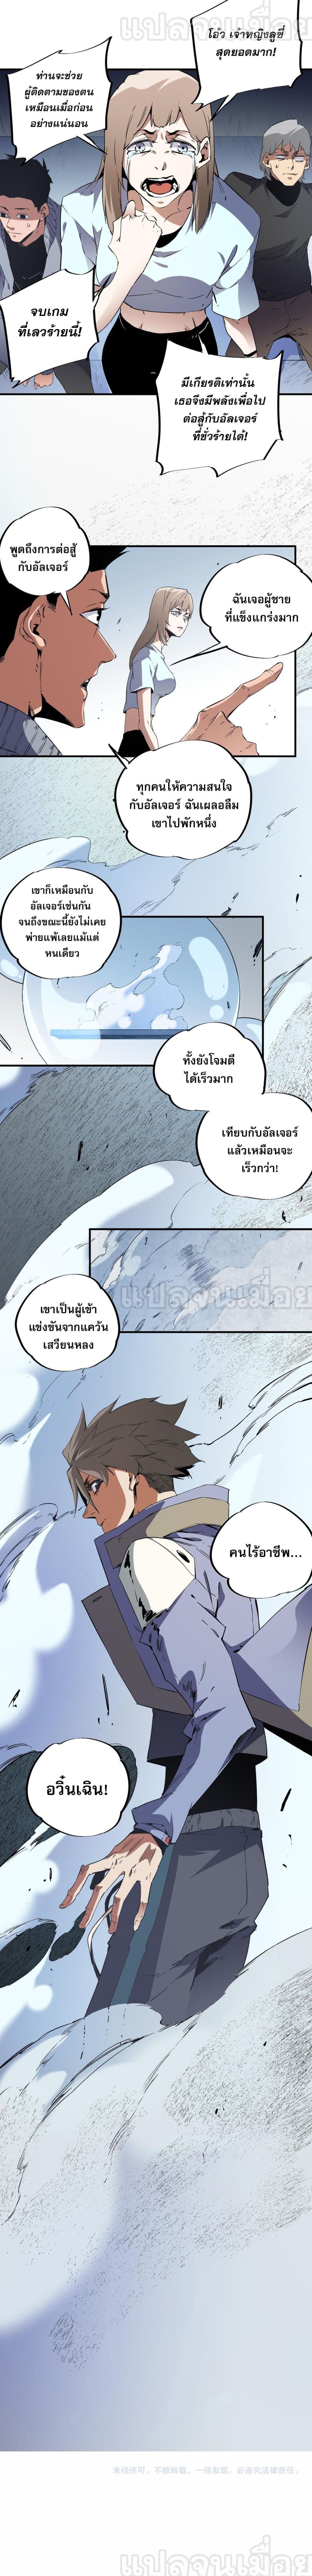 Job Changing for the Entire Population: The Jobless Me Will Terminate the Gods ฉันคือผู้เล่นไร้อาชีพที่สังหารเหล่าเทพ 73-73